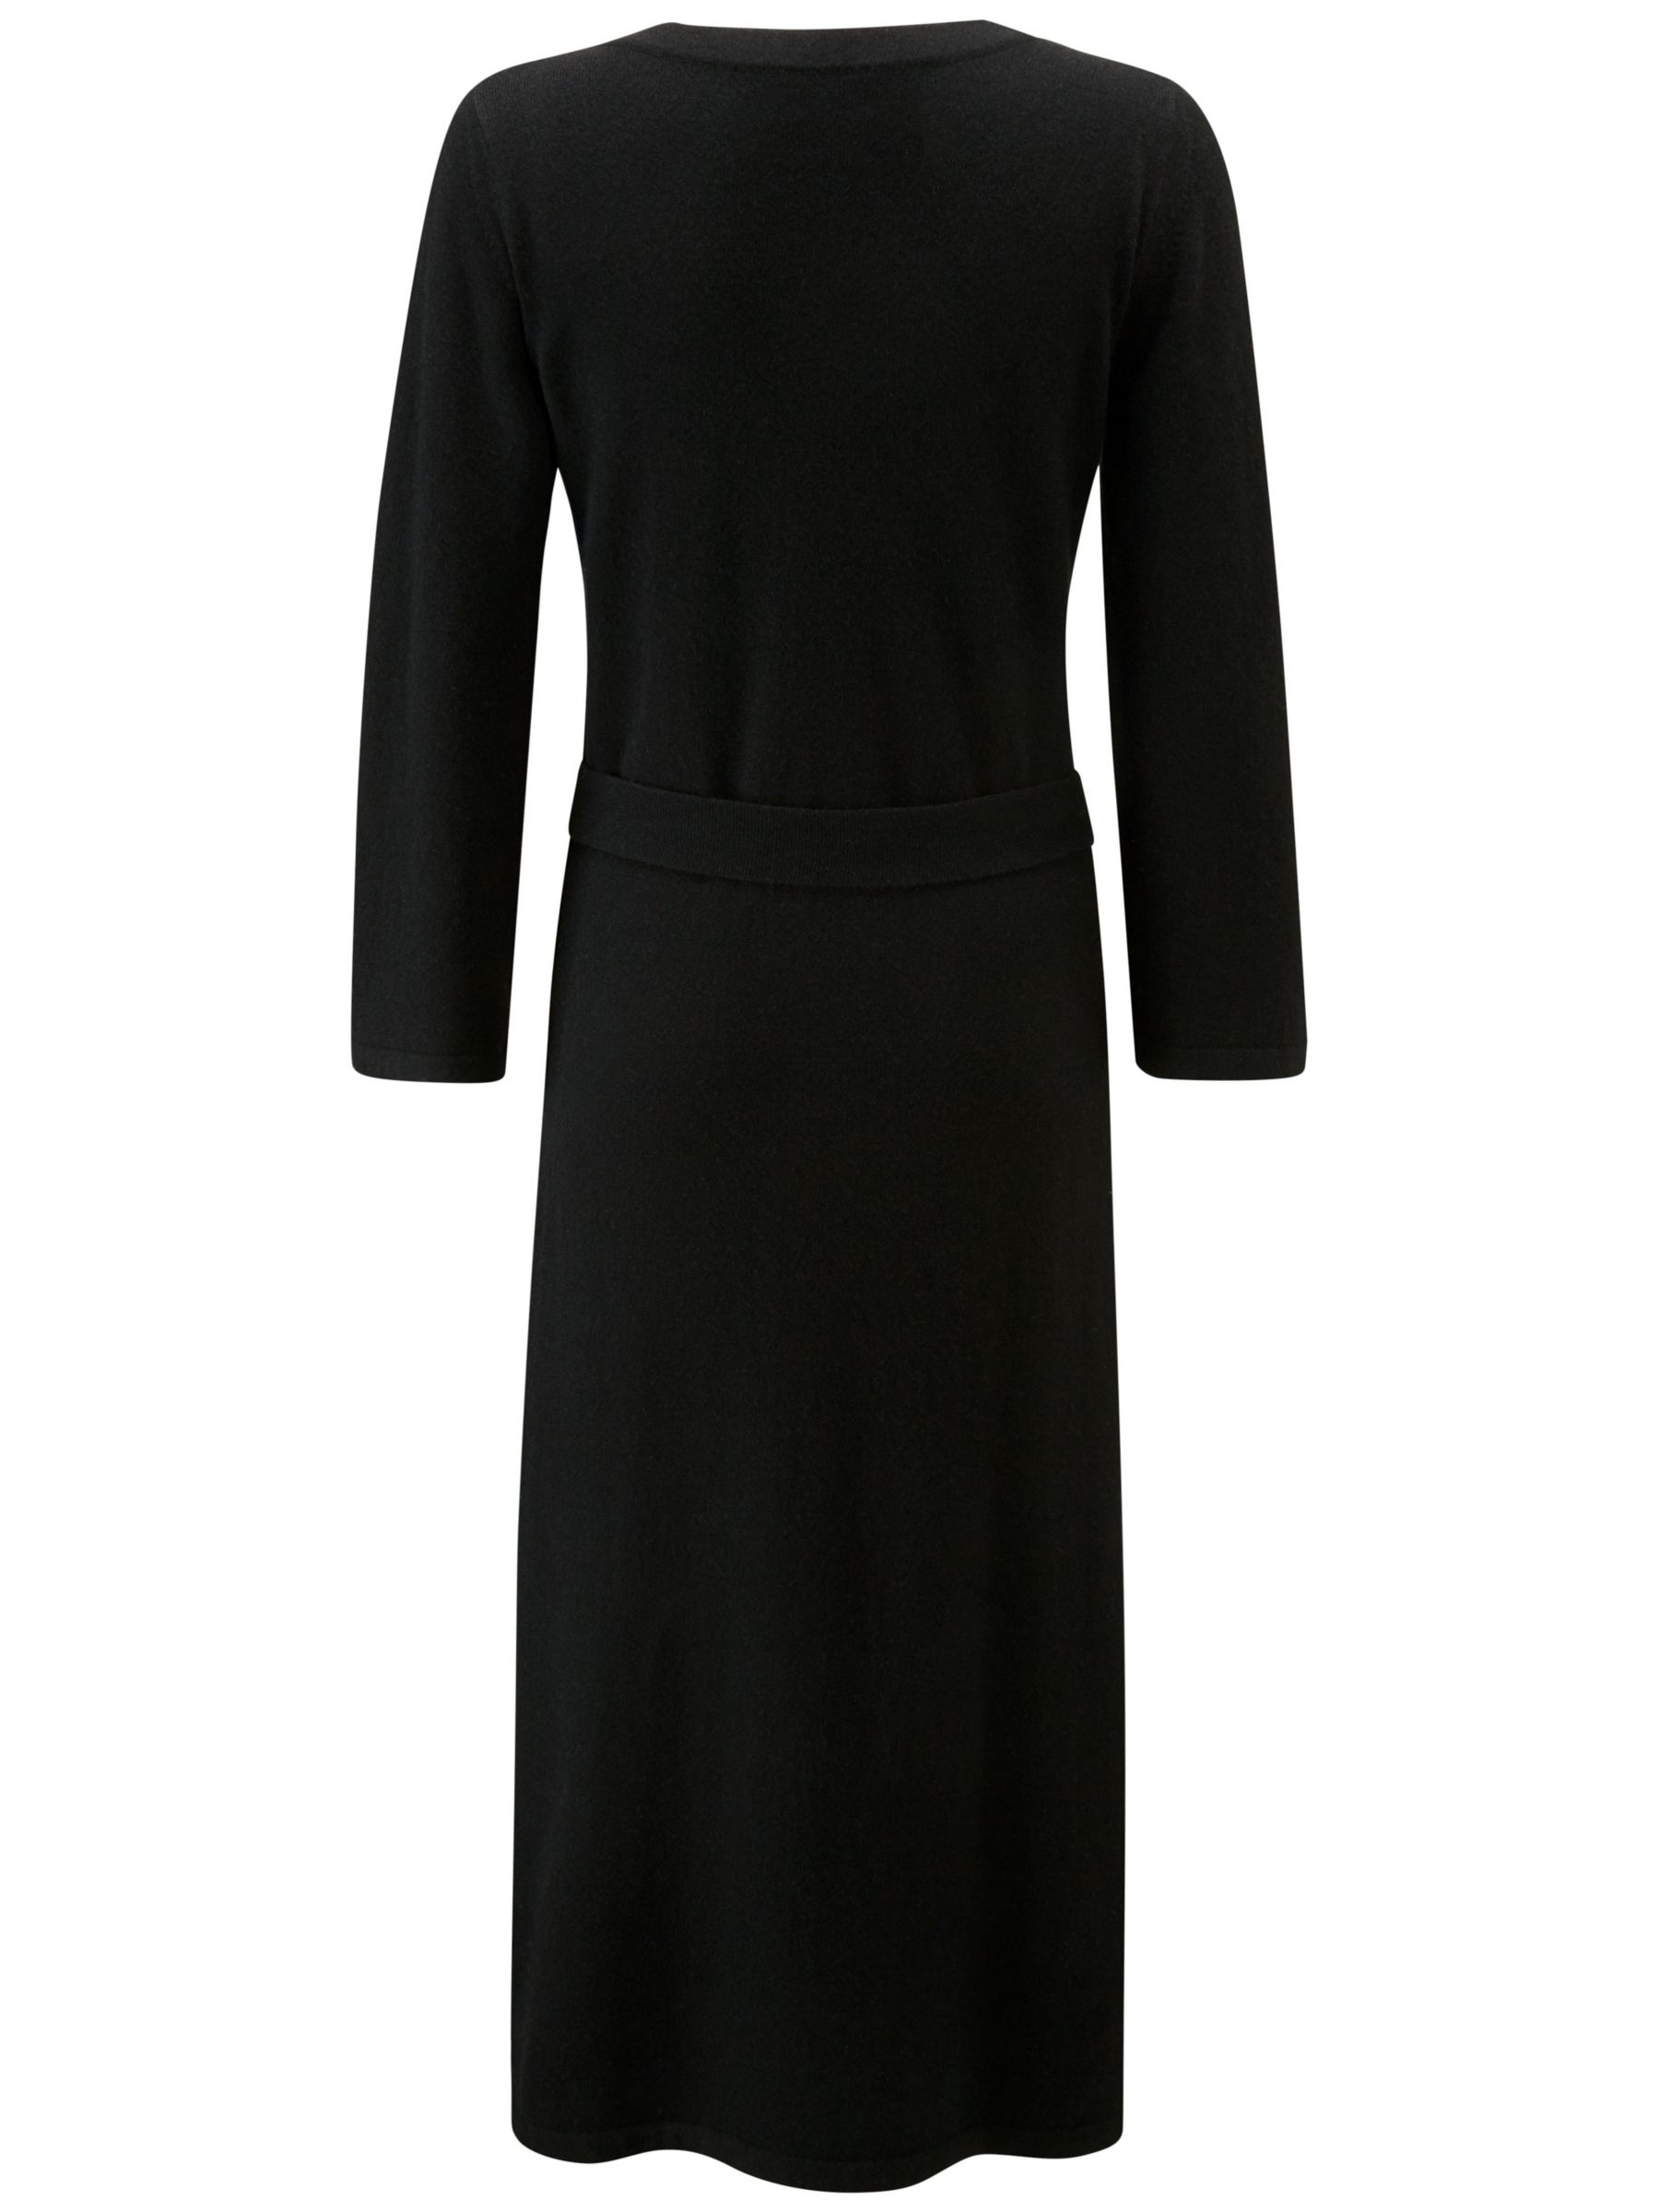 Pure Collection Knitted Cashmere Dress, Black at John Lewis & Partners